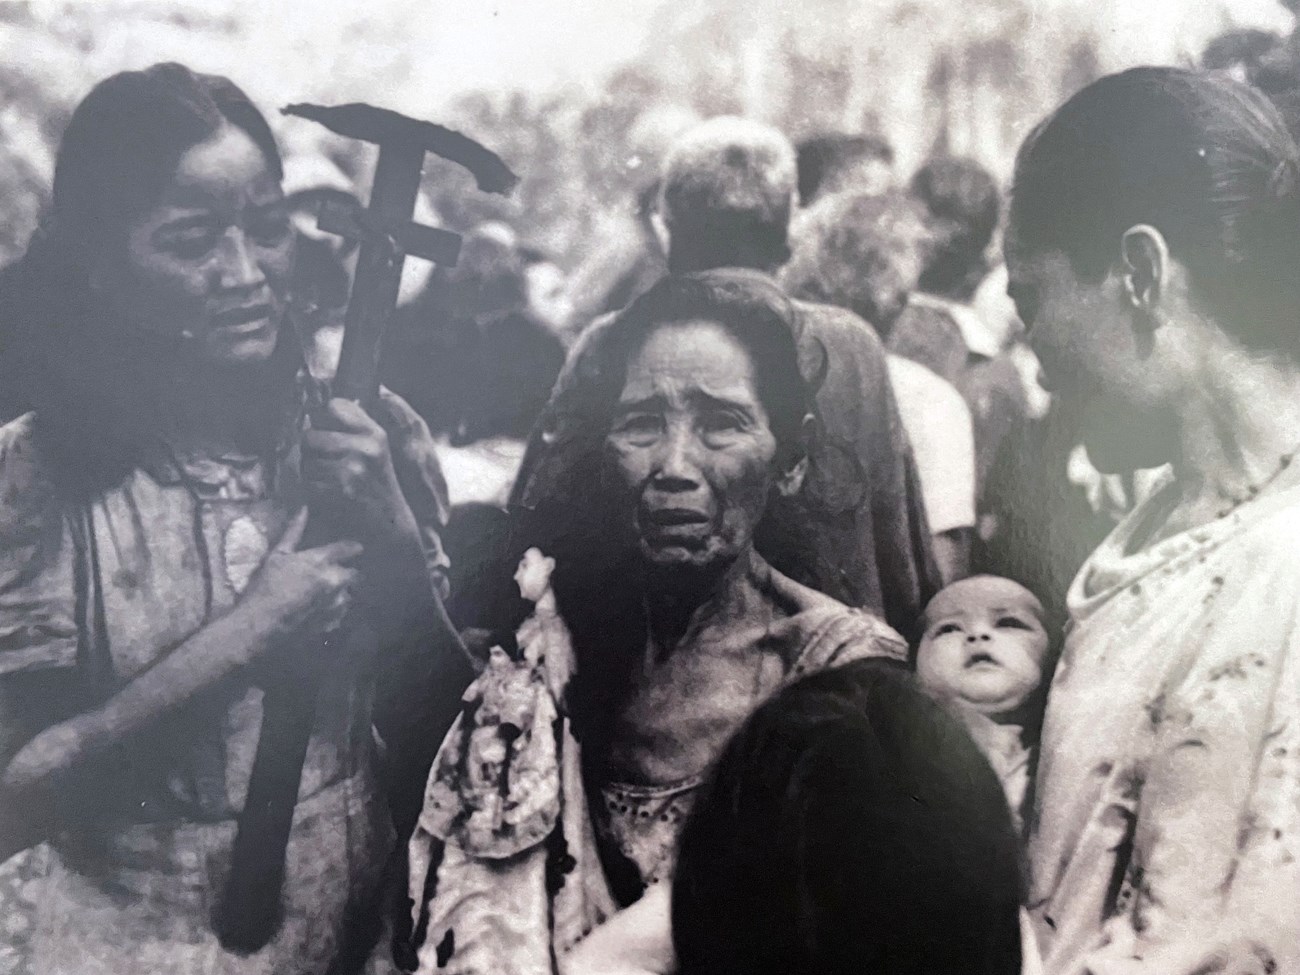 Black and white photo of two women holding religious items flanking distressed older woman in crowd